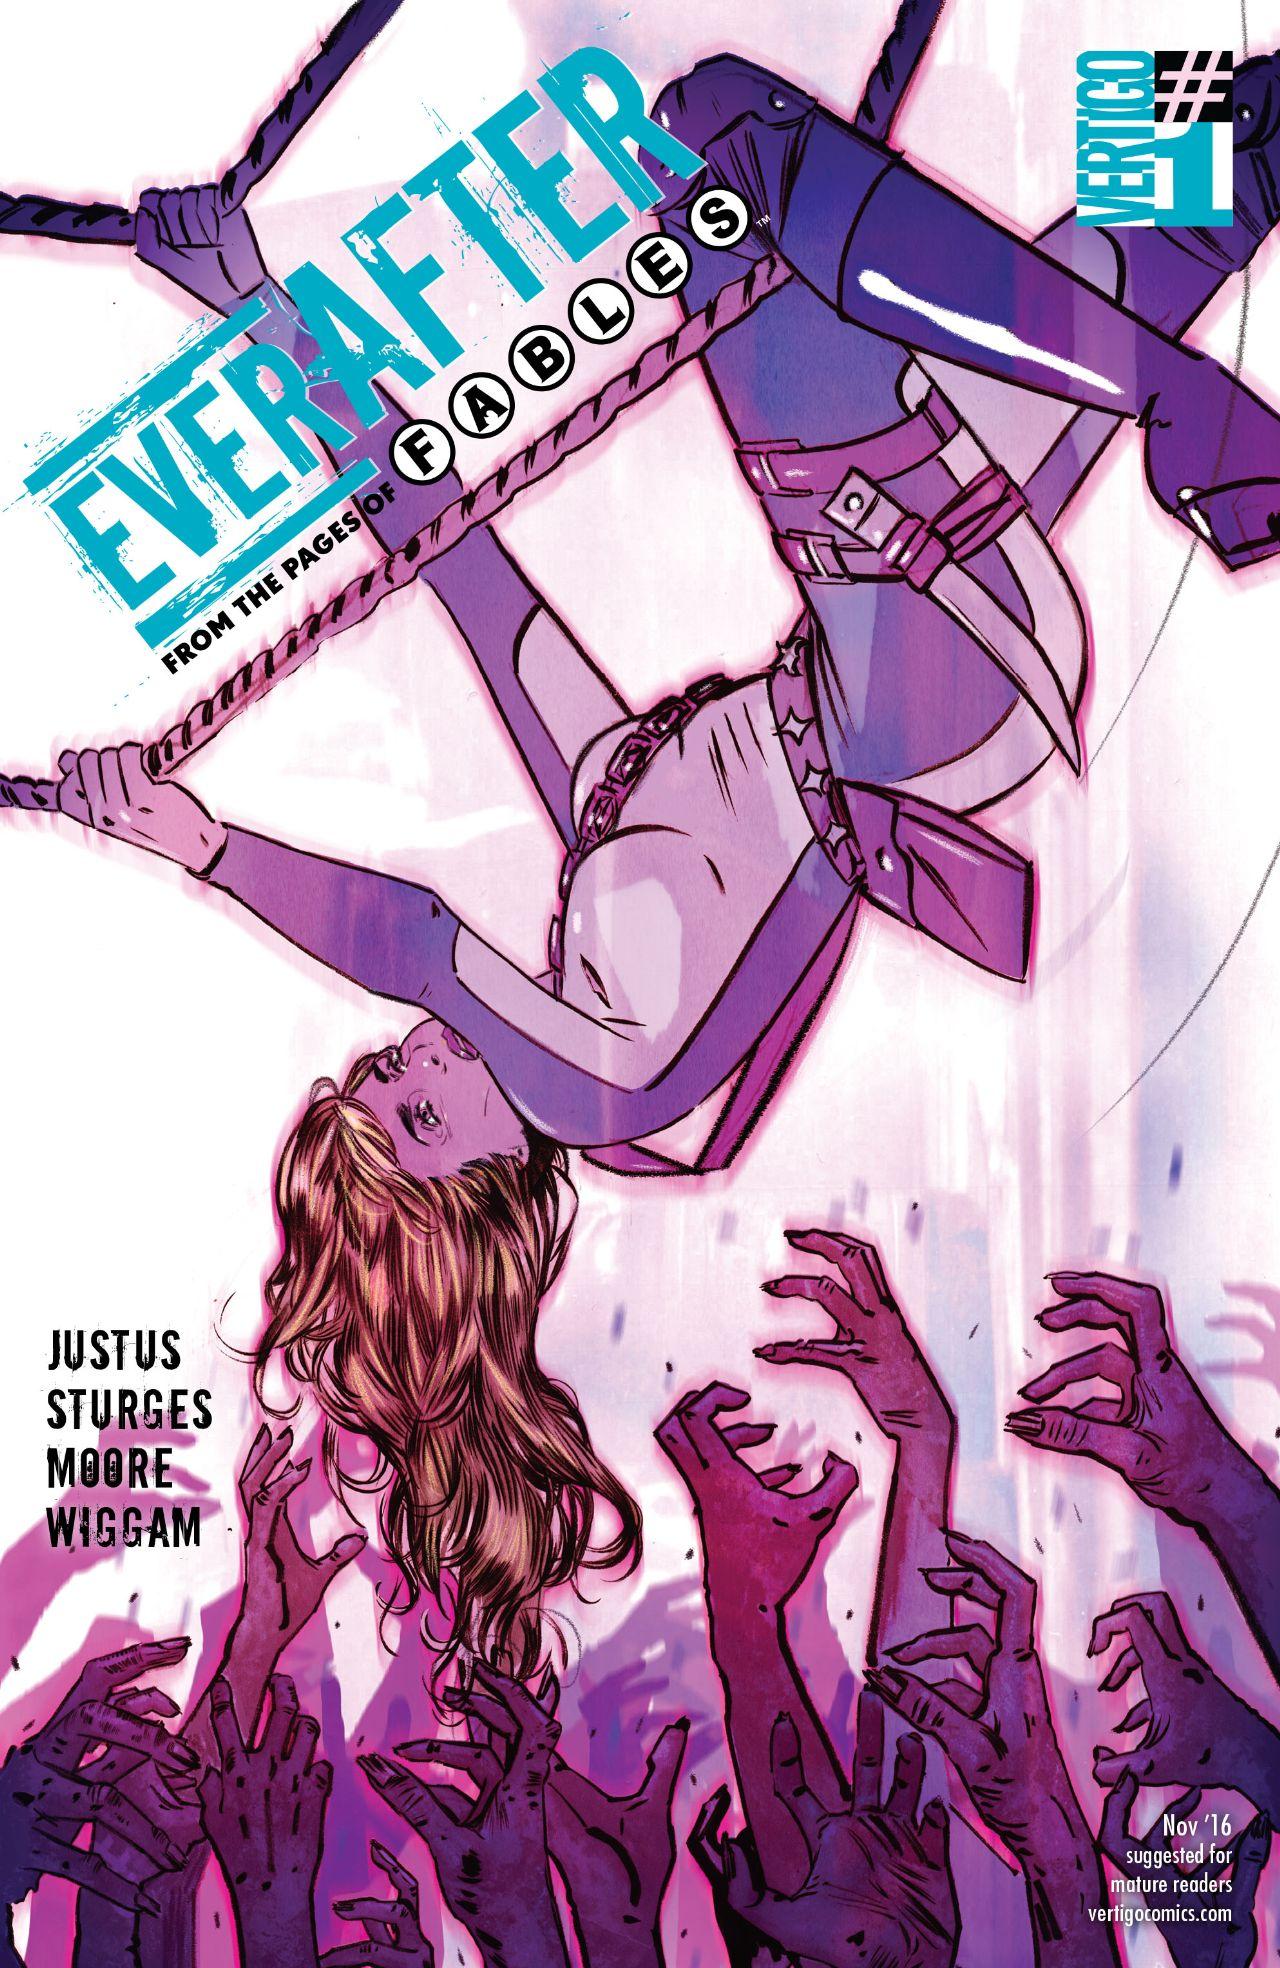 Everafter: From the Pages of Fables Vol. 1 #1